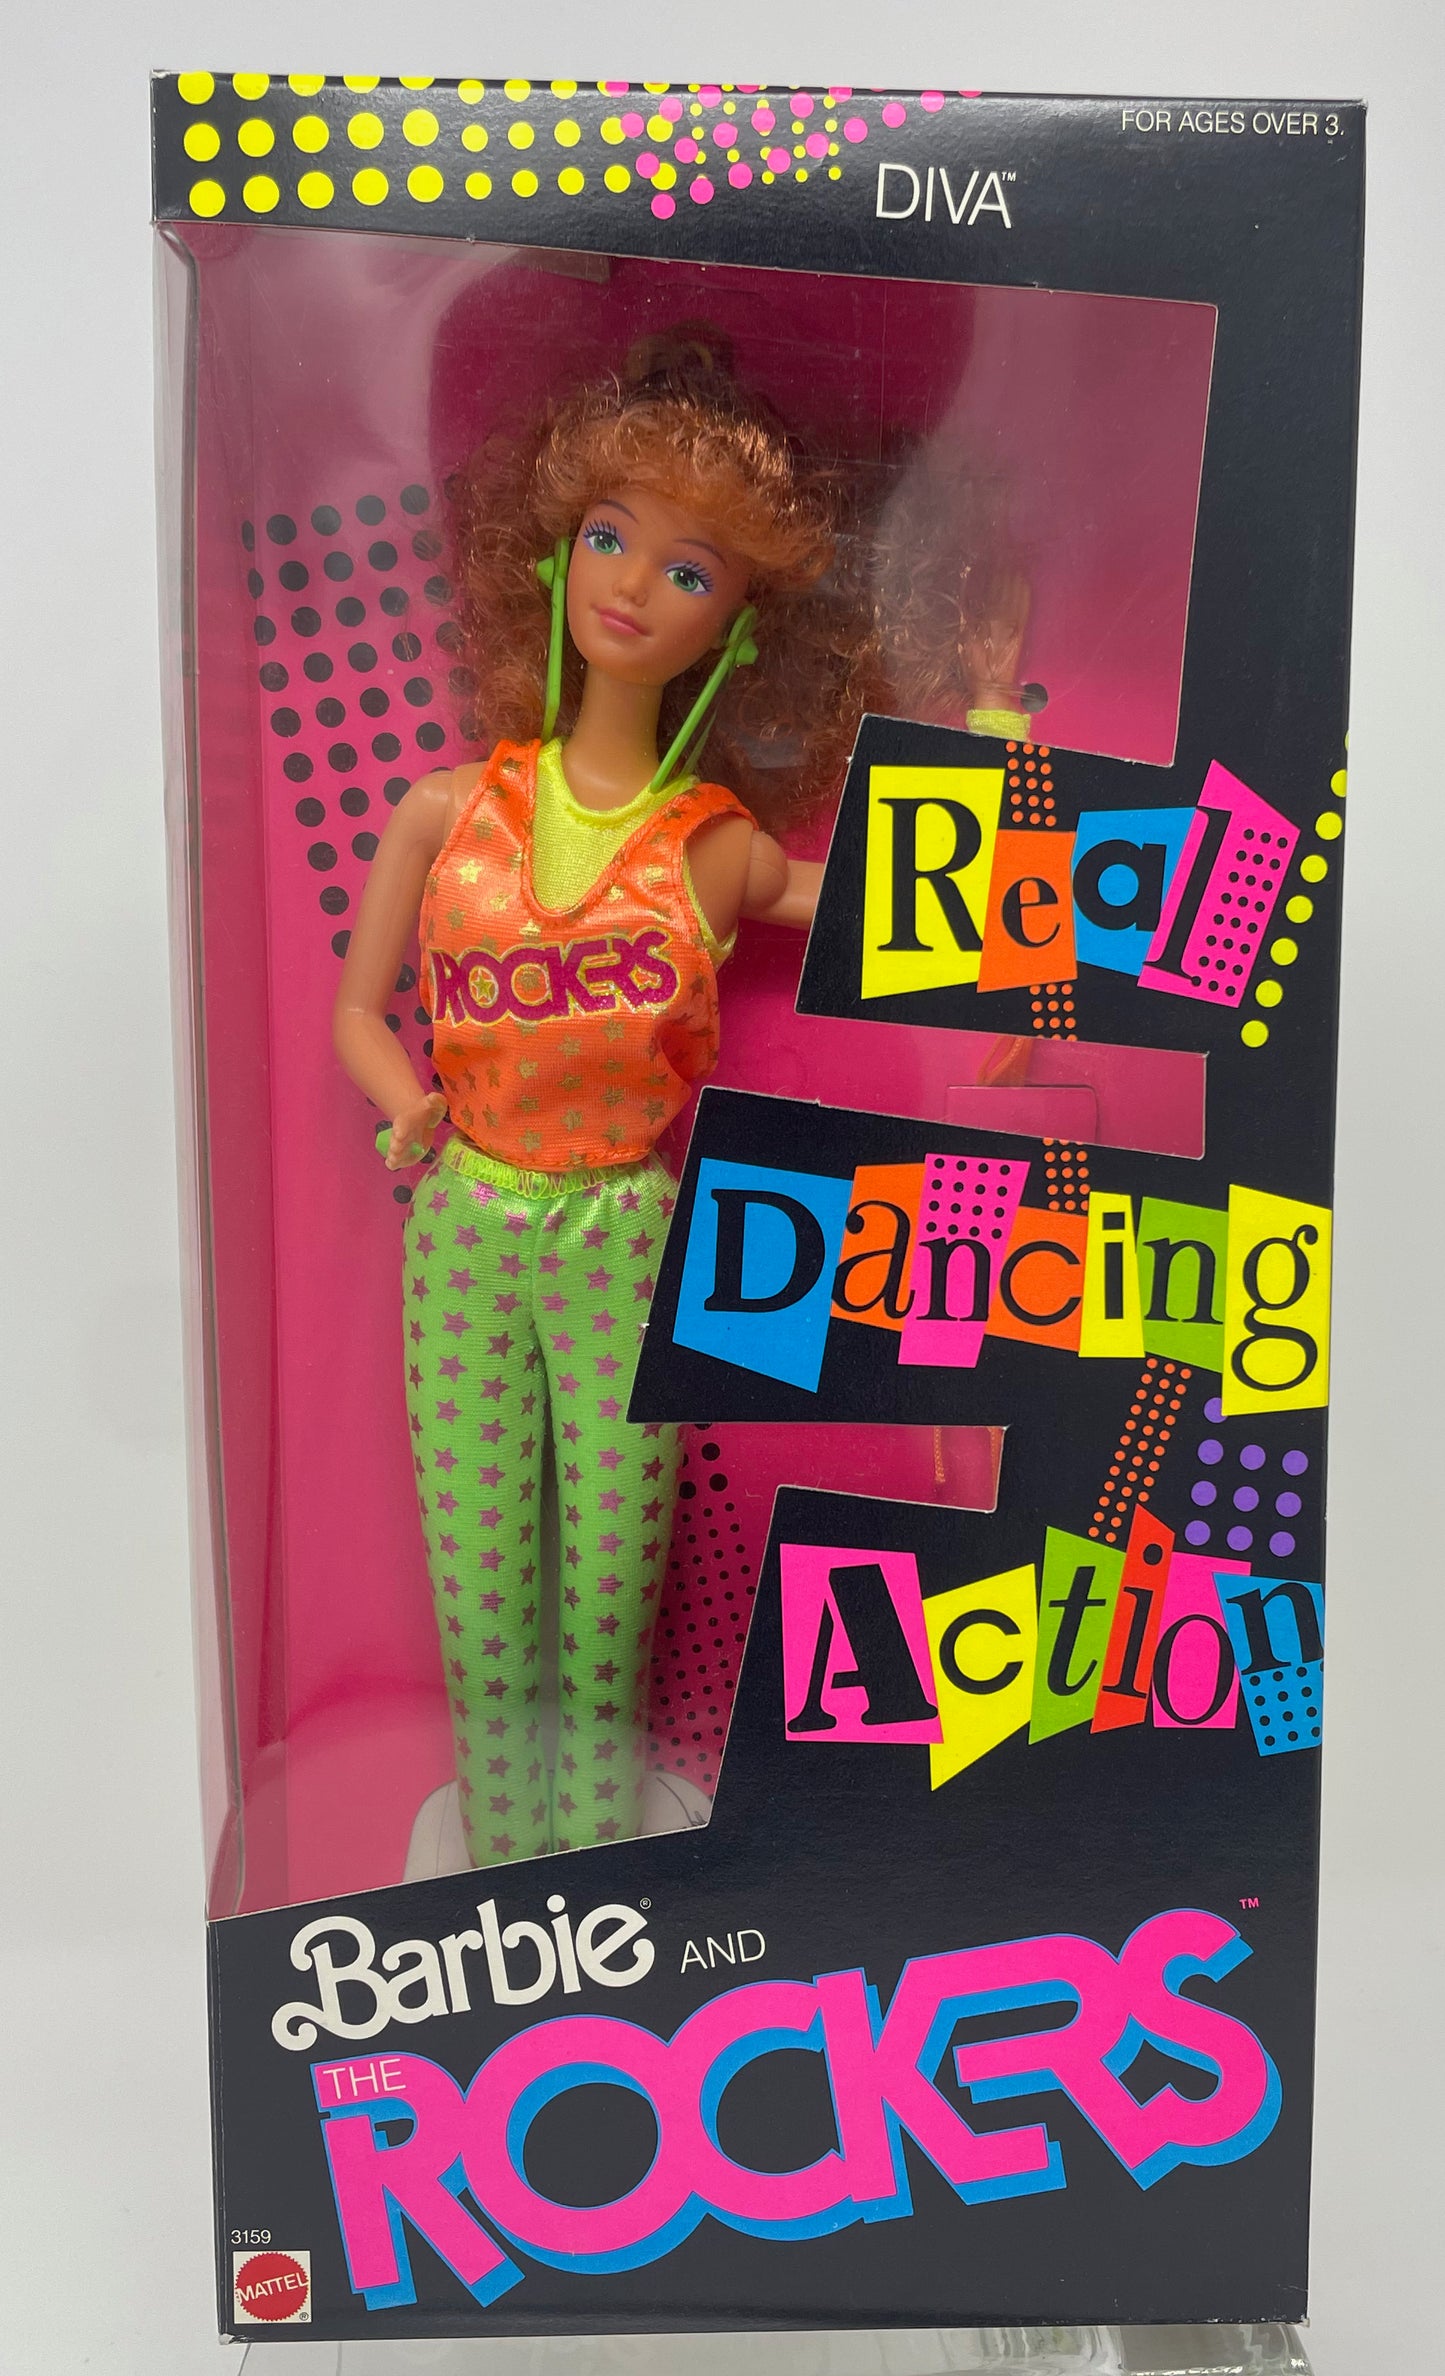 BARBIE AND THE ROCKERS - DIVA - REAL DANCING ACTION #3159 - MATTEL 1986